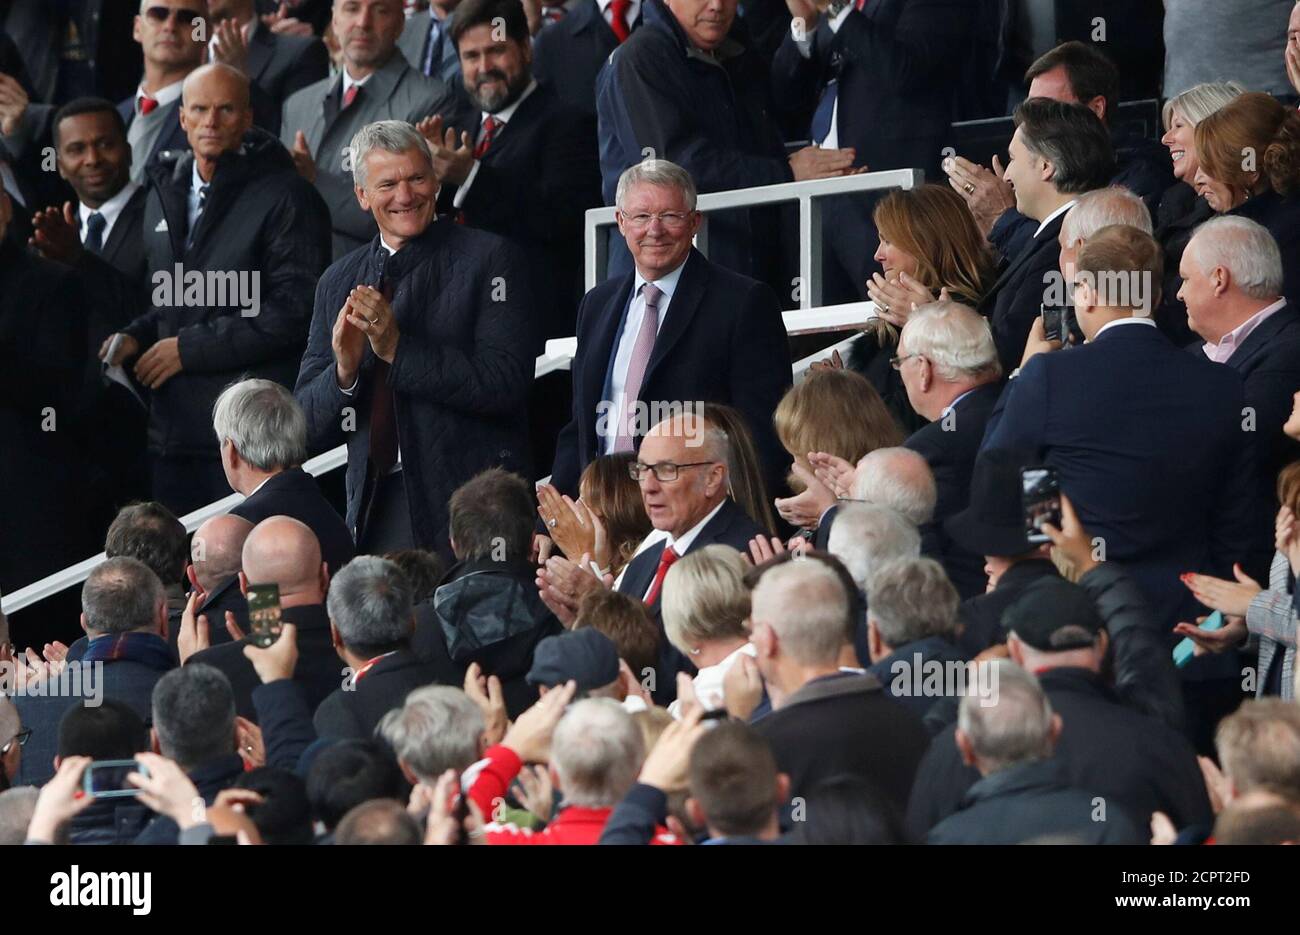 Soccer Football - Premier League - Manchester United v Wolverhampton Wanderers - Old Trafford, Manchester, Britain - September 22, 2018  Sir Alex Ferguson and FIFA Council vice-president David Gill in the stands before the match  Action Images via Reuters/Carl Recine  EDITORIAL USE ONLY. No use with unauthorized audio, video, data, fixture lists, club/league logos or 'live' services. Online in-match use limited to 75 images, no video emulation. No use in betting, games or single club/league/player publications.  Please contact your account representative for further details. Stock Photo